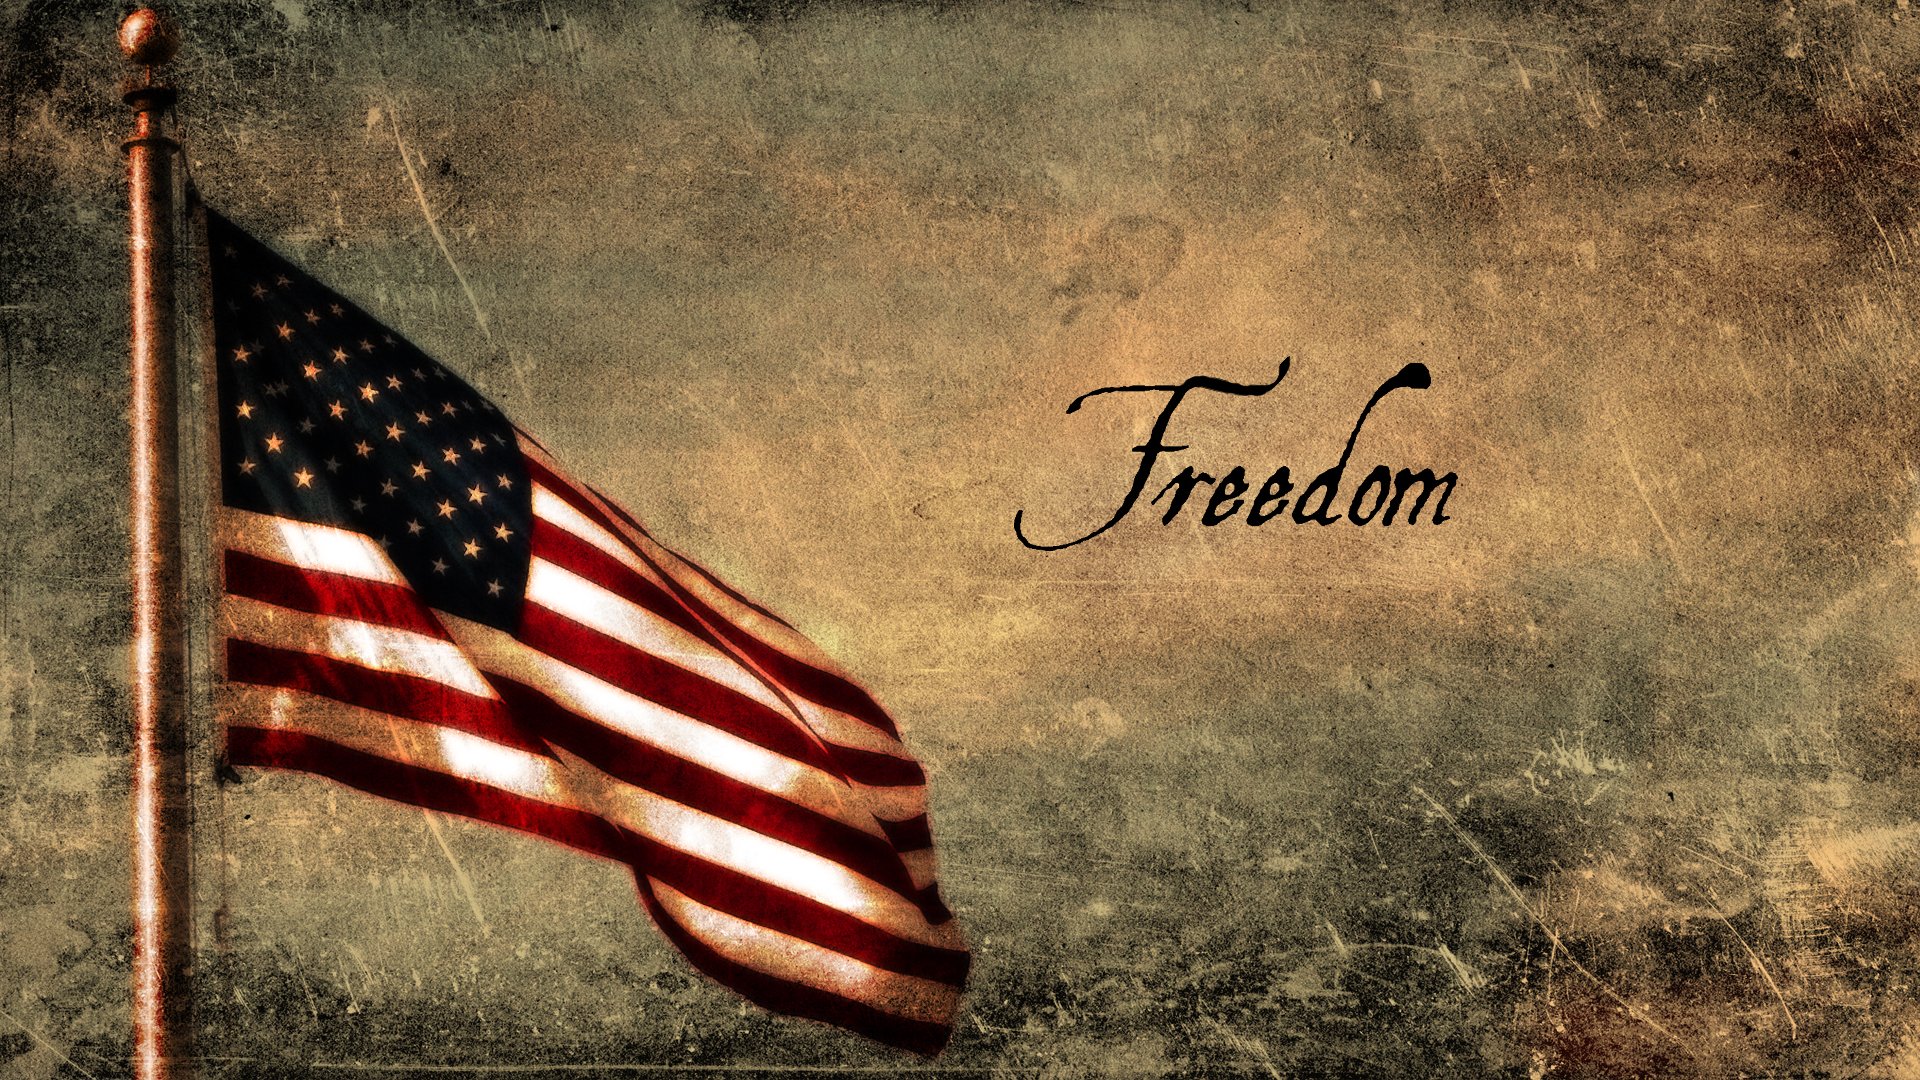 Wallpaper Of The Day Freedom   Common Sense Evaluation